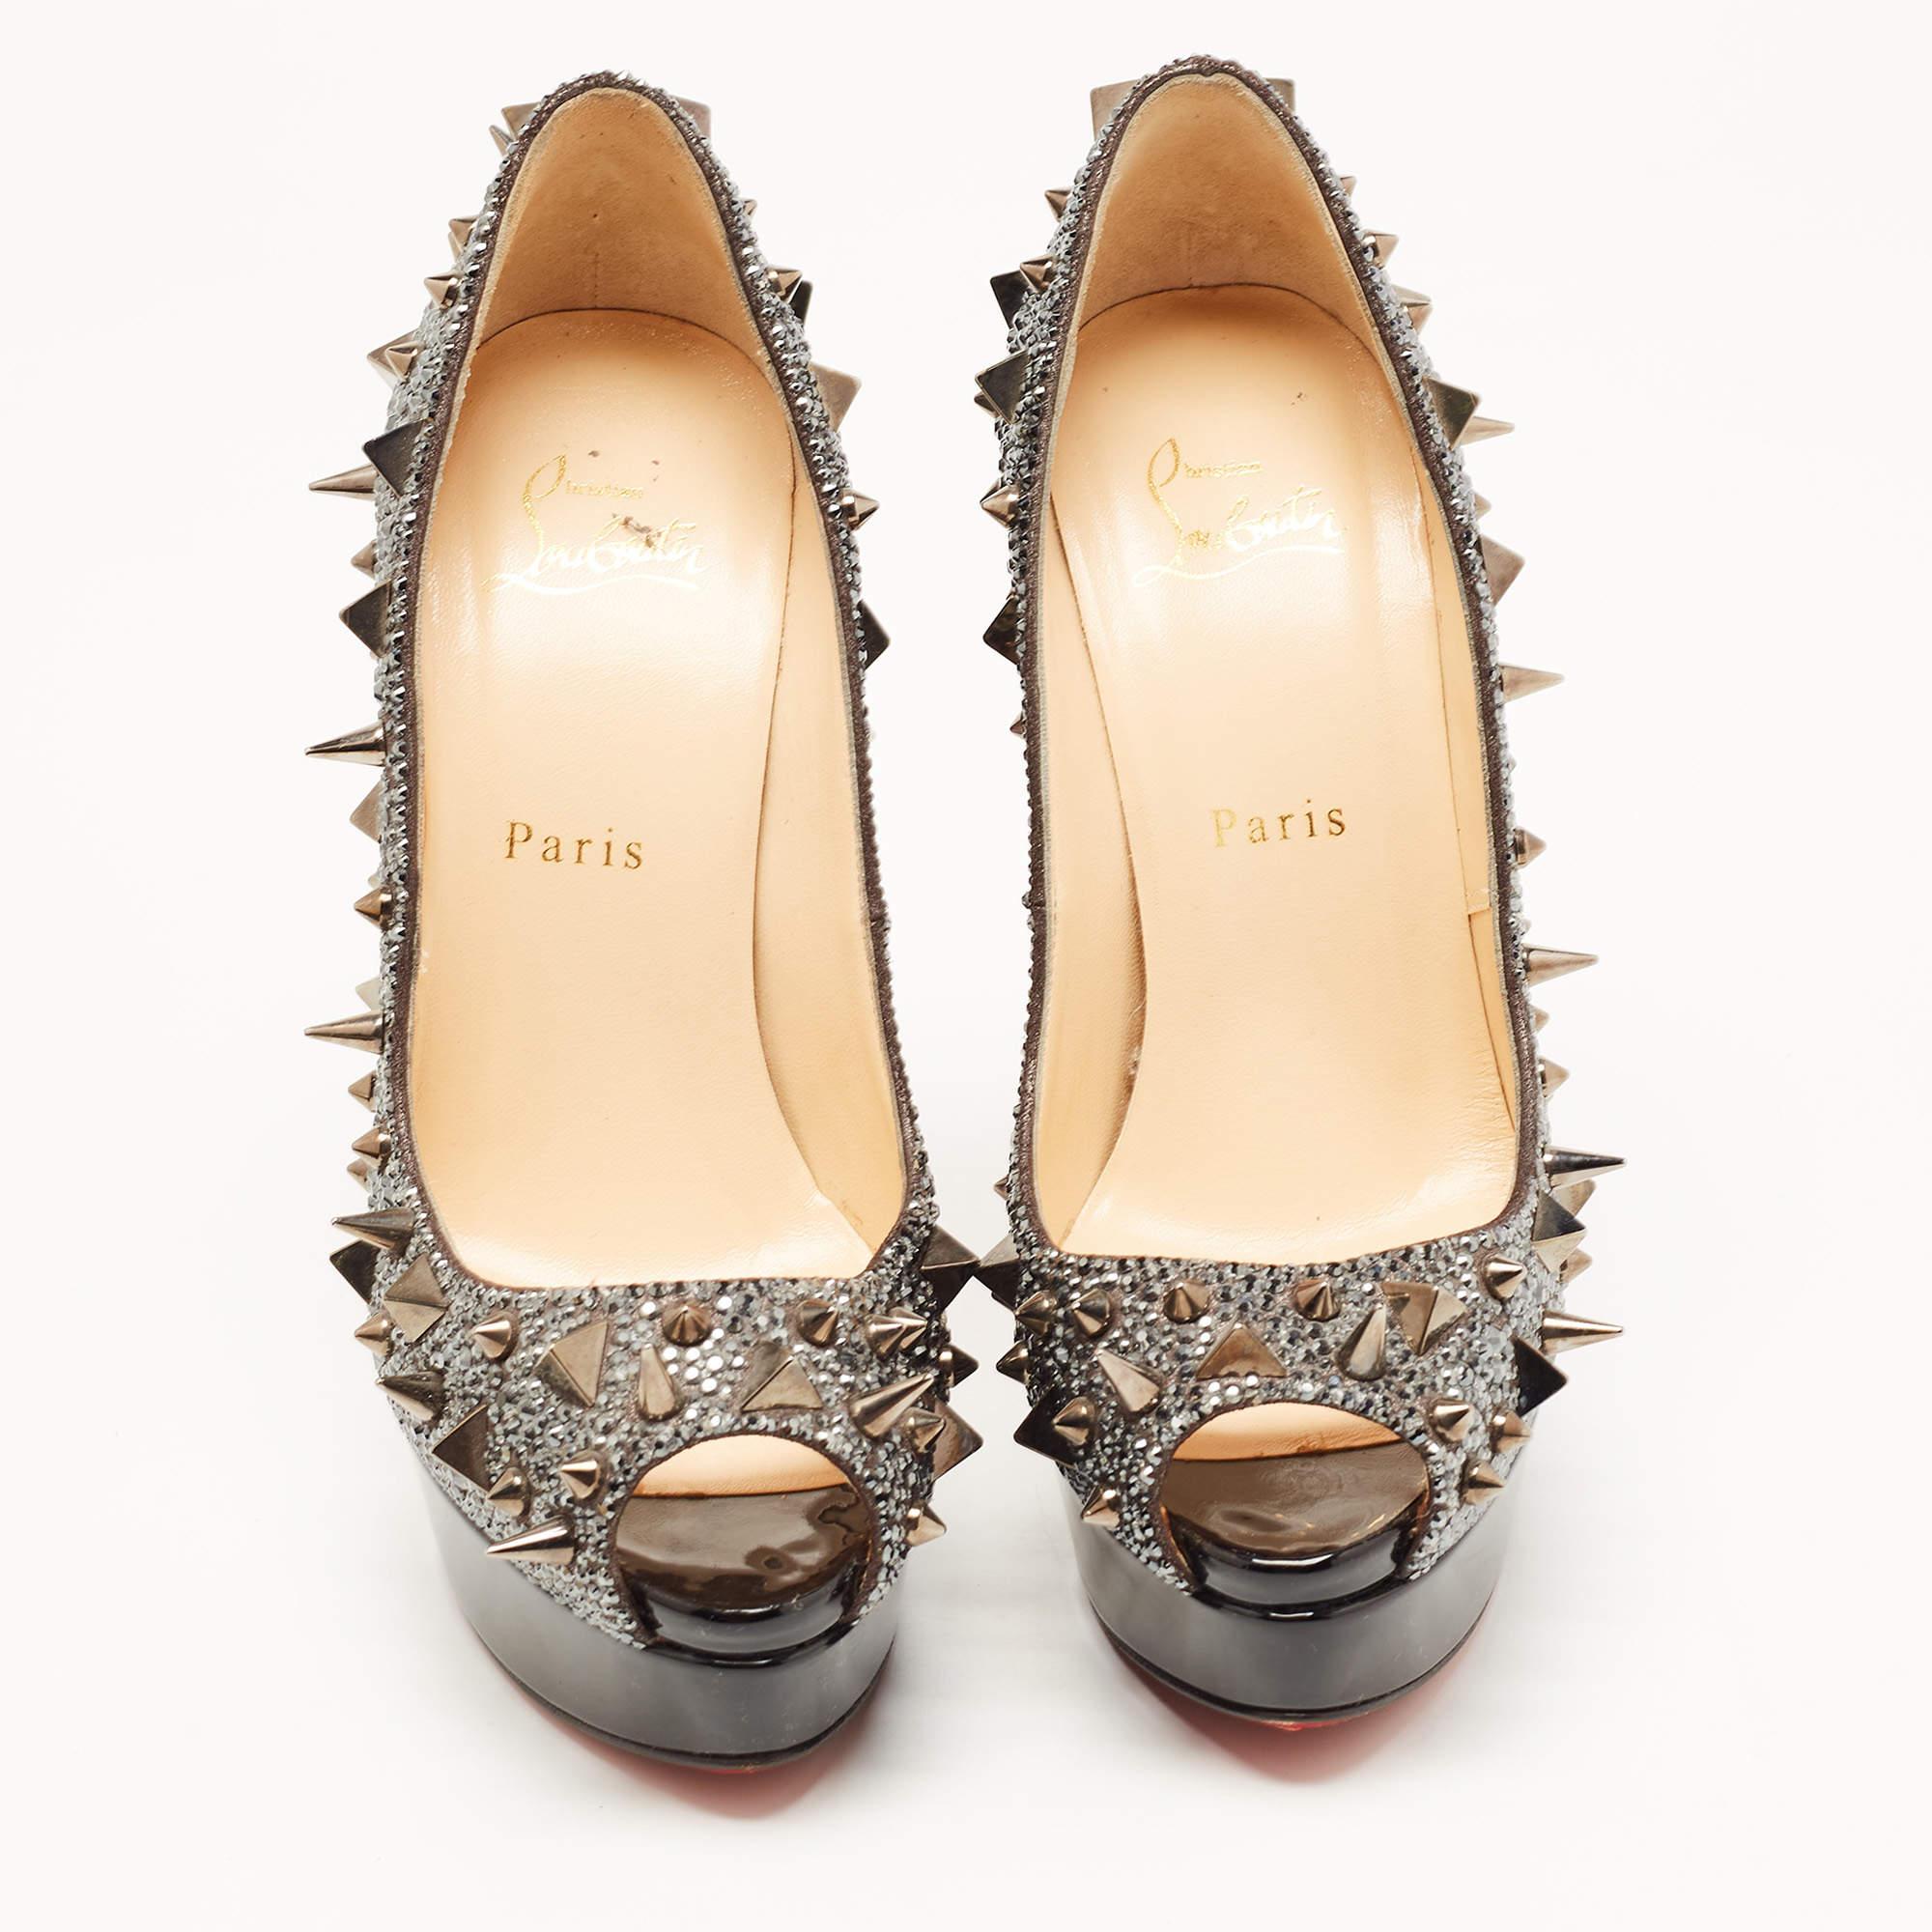 These spike pumps from Christian Louboutin are meant to be a loved choice. Wonderfully crafted and balanced on sleek heels, the pumps will lift your feet in a stunning silhouette.

